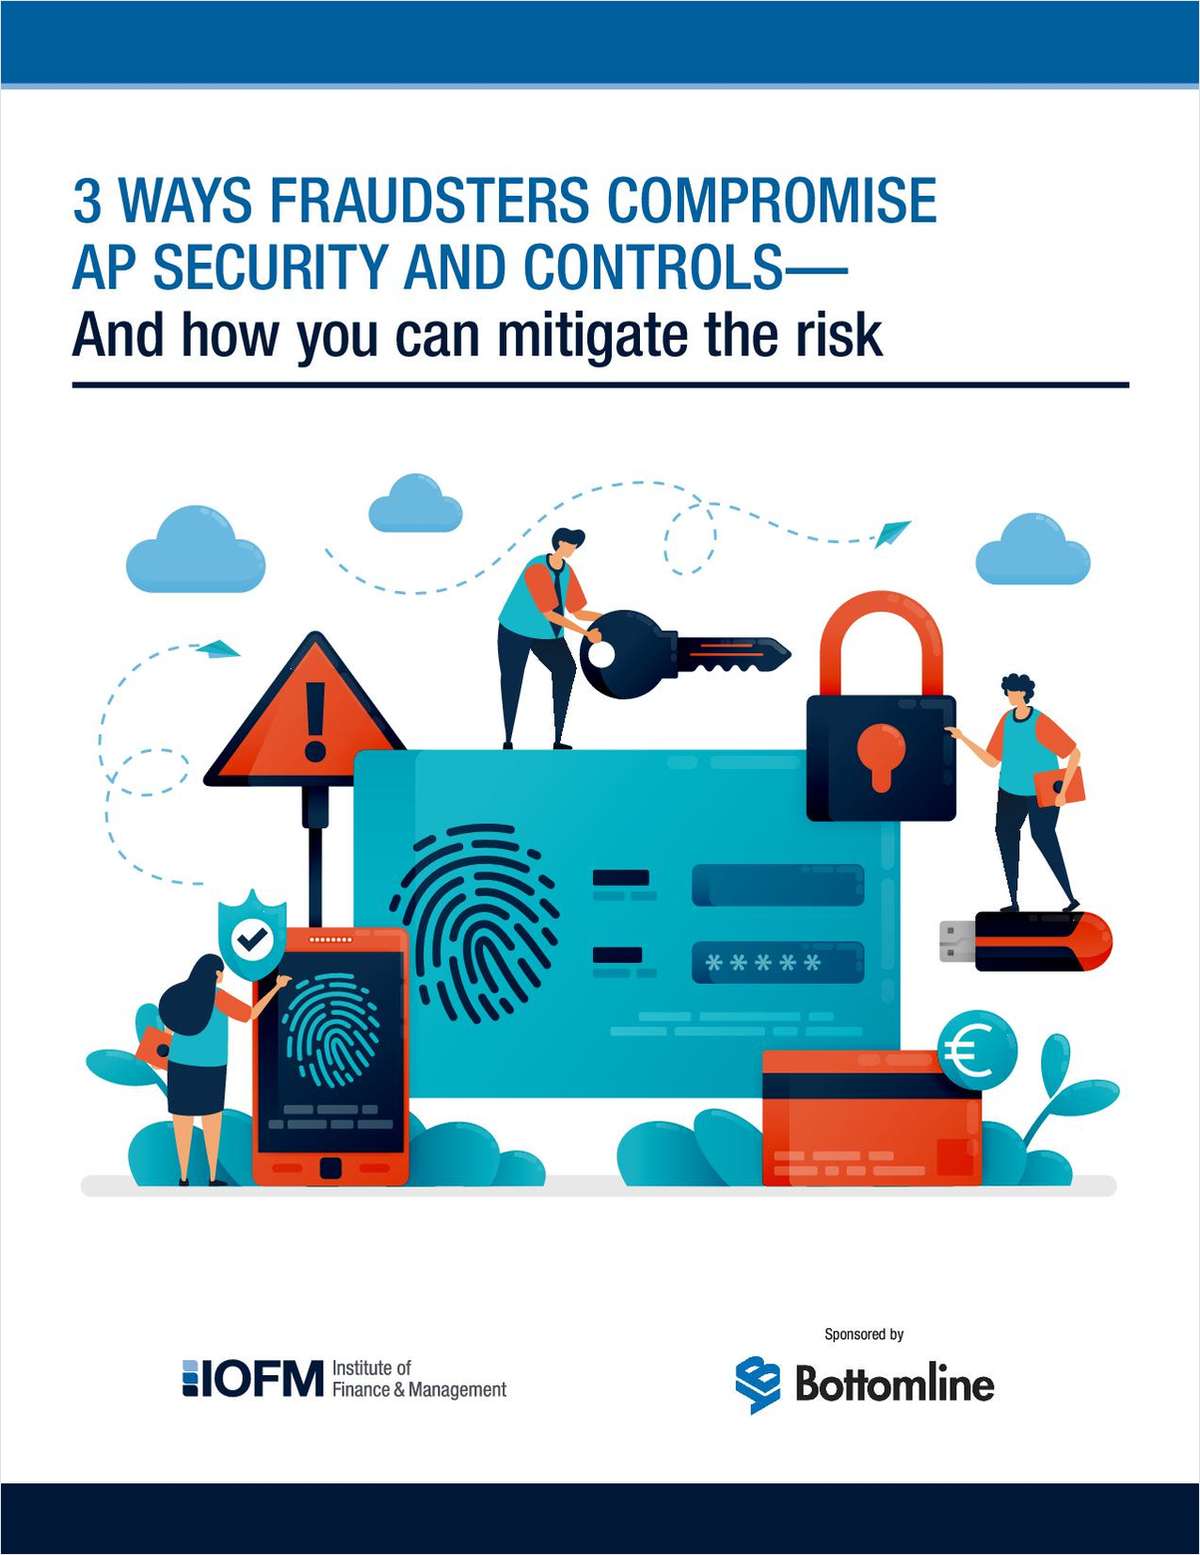 3 Ways Fraudsters Compromise AP Security and Controls and How You Can Mitigate the Risk